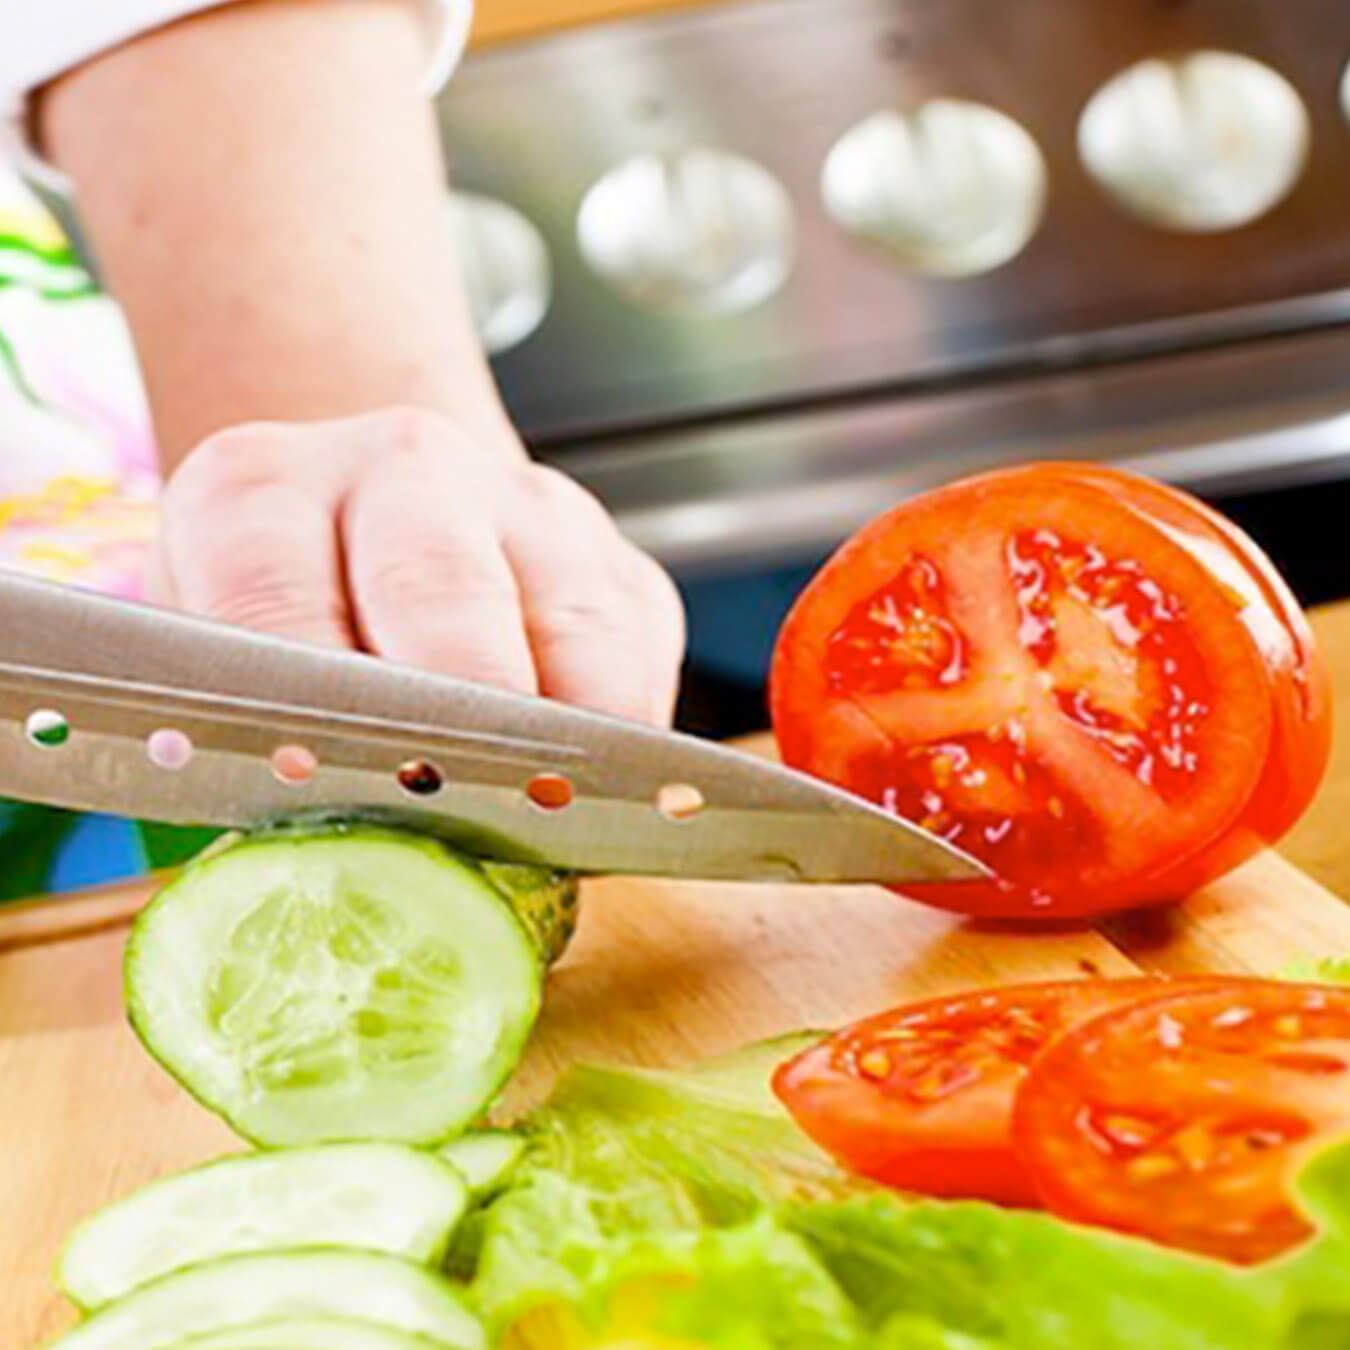 food-safety-courses-uk.jpg